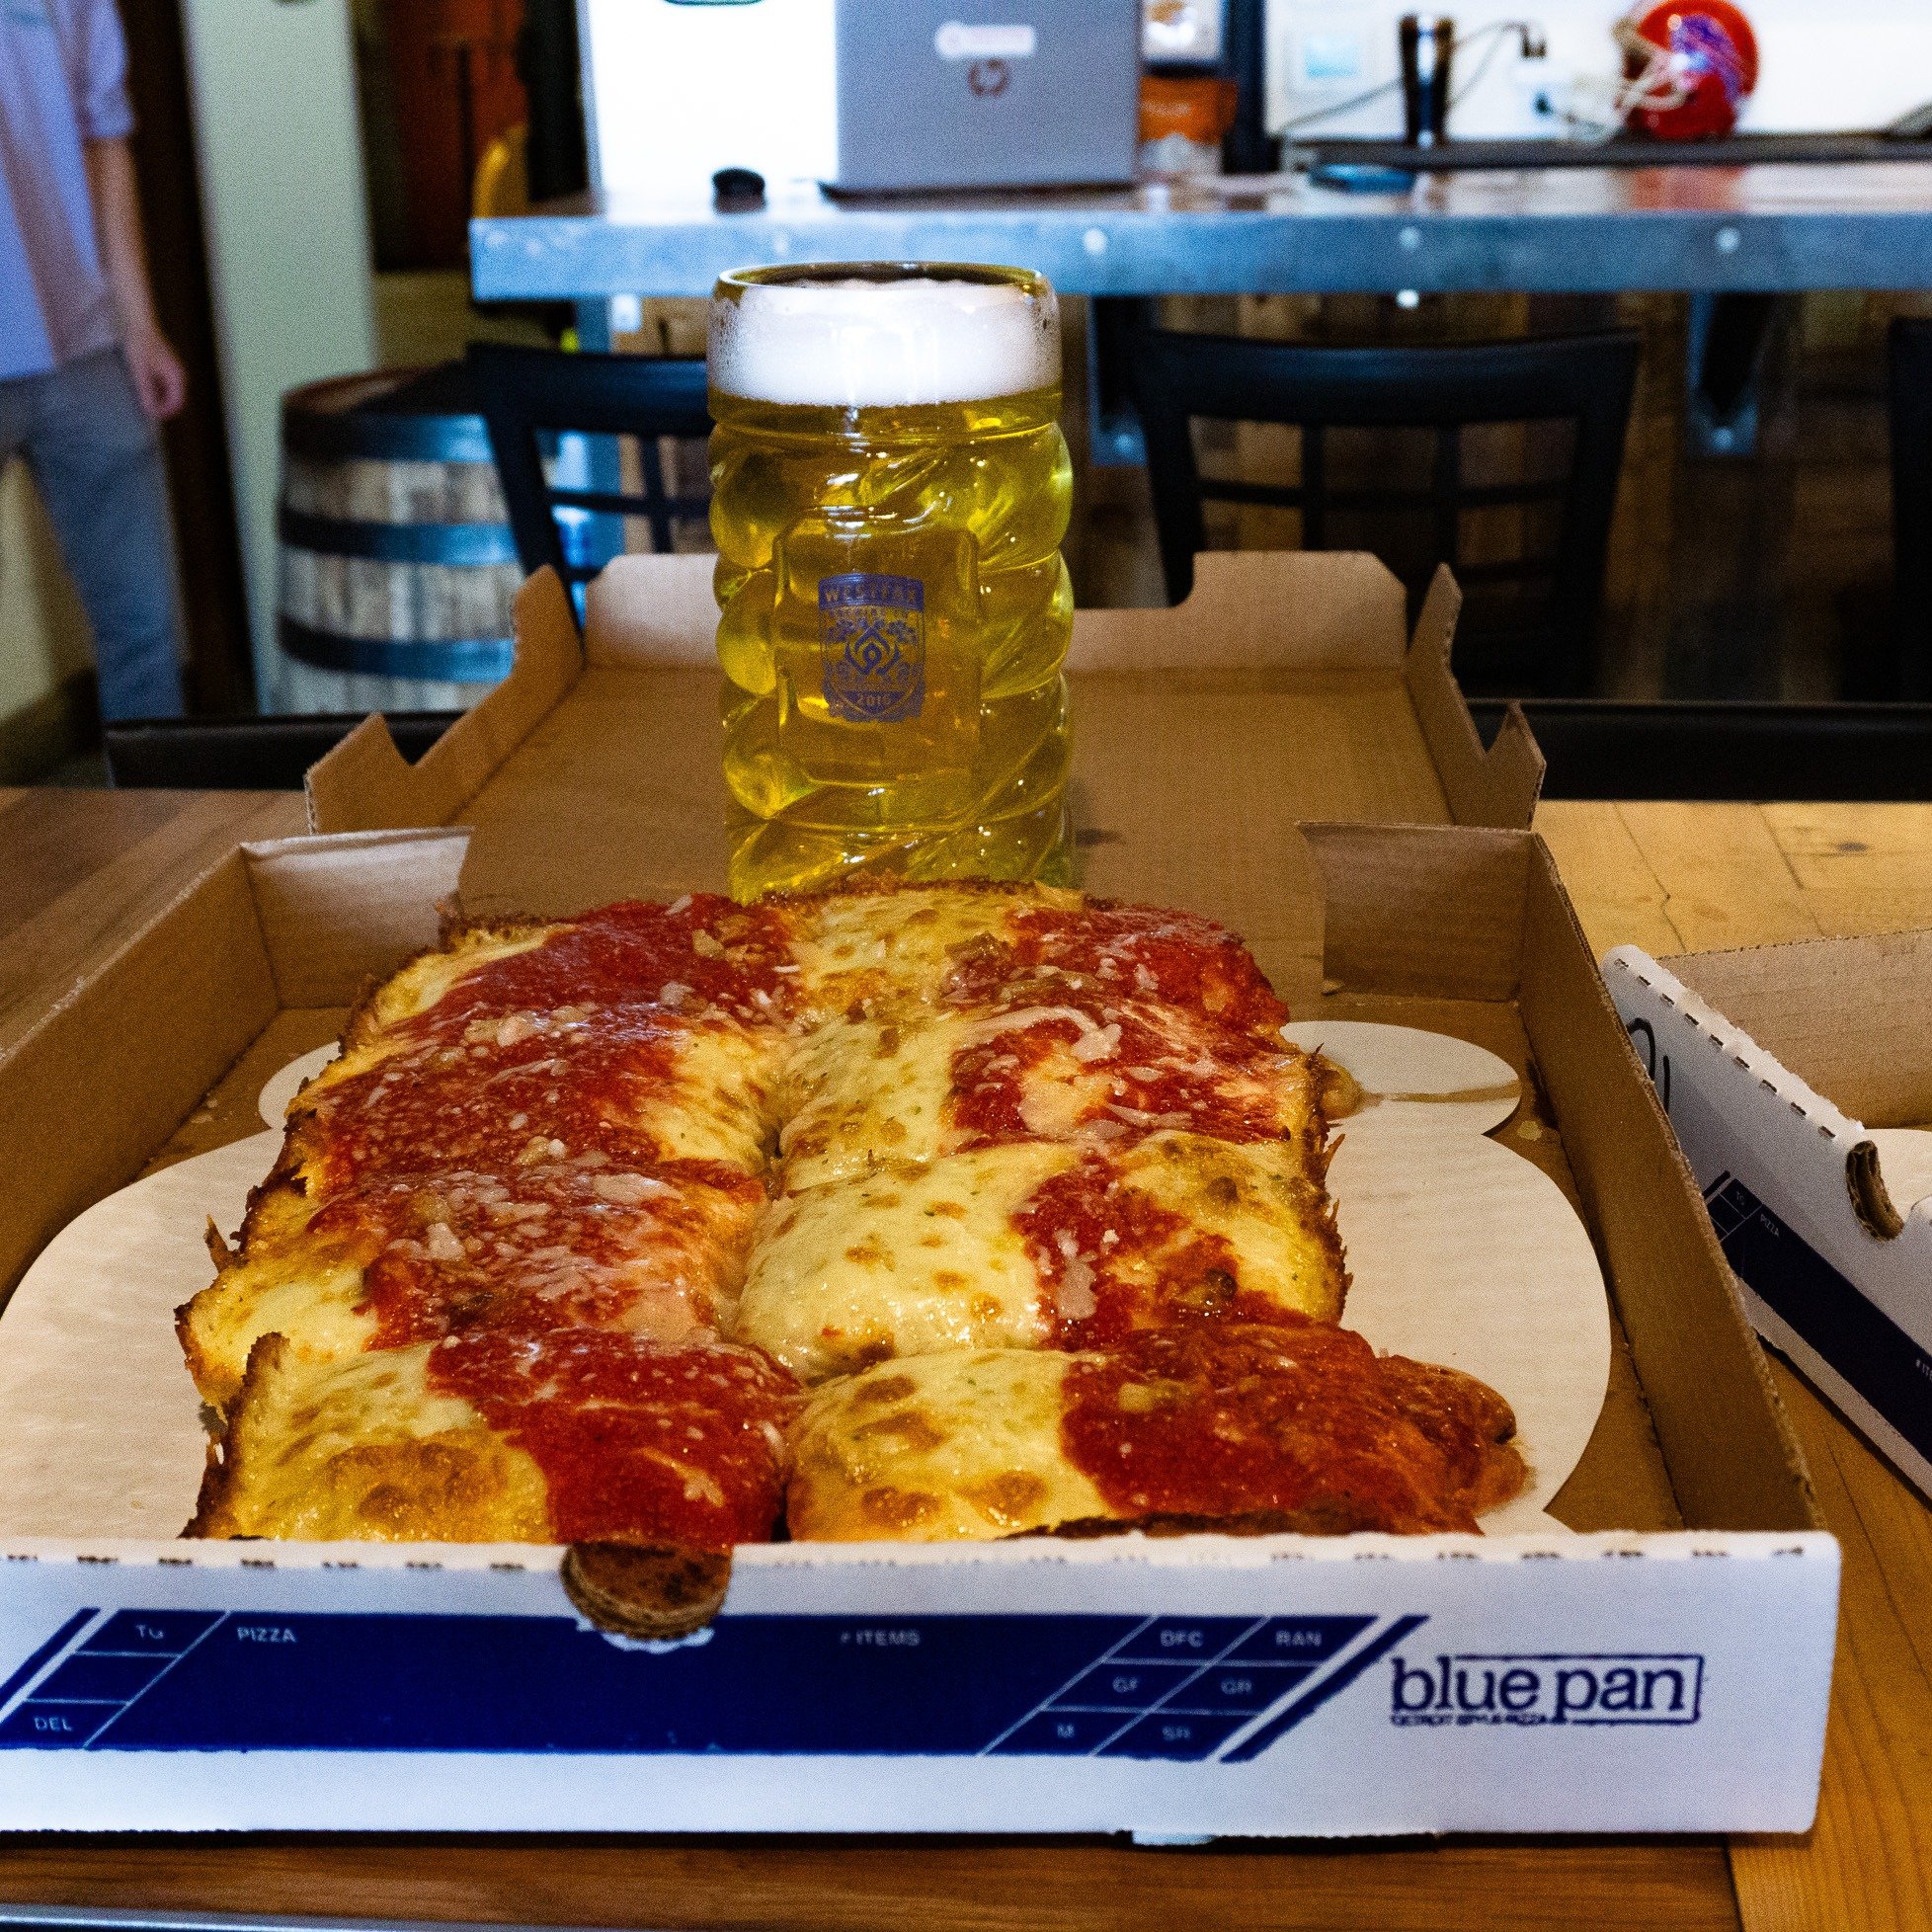 NEXT Thursday, May 23rd, enjoy some mouth-watering @bluepanpizza with your trivia team and $10 stein fills for those who bring their WestFax stein. 🍺

Don't have a stein? No sweat! Get your first pour FREE when you buy a WestFax stein for $16. We'll